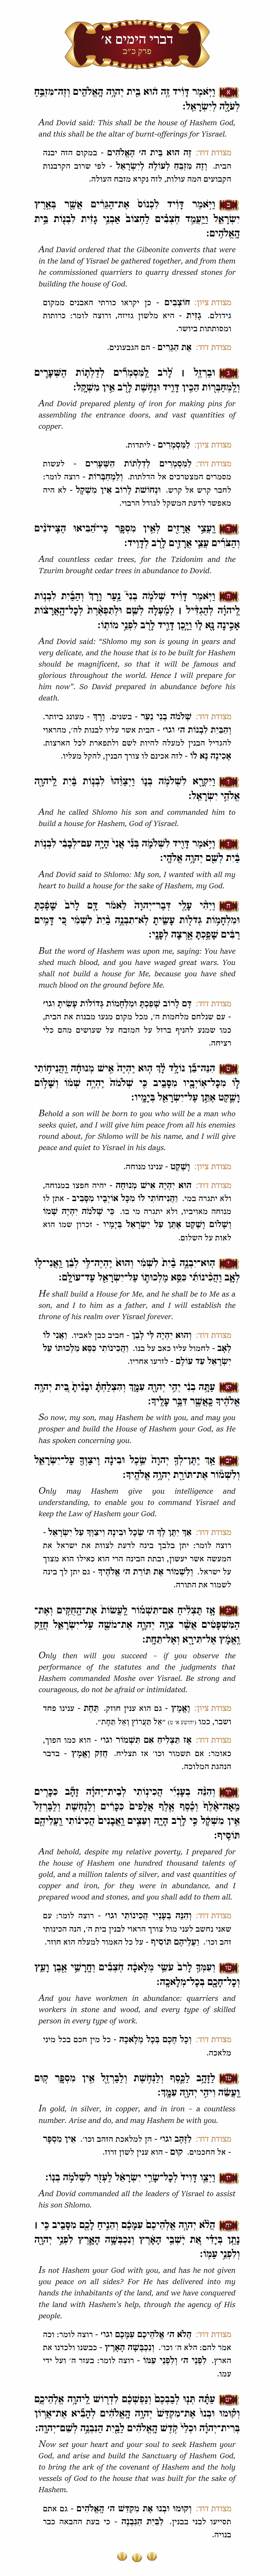 Sefer Divrei Hayomim 1 Chapter 22 with commentary